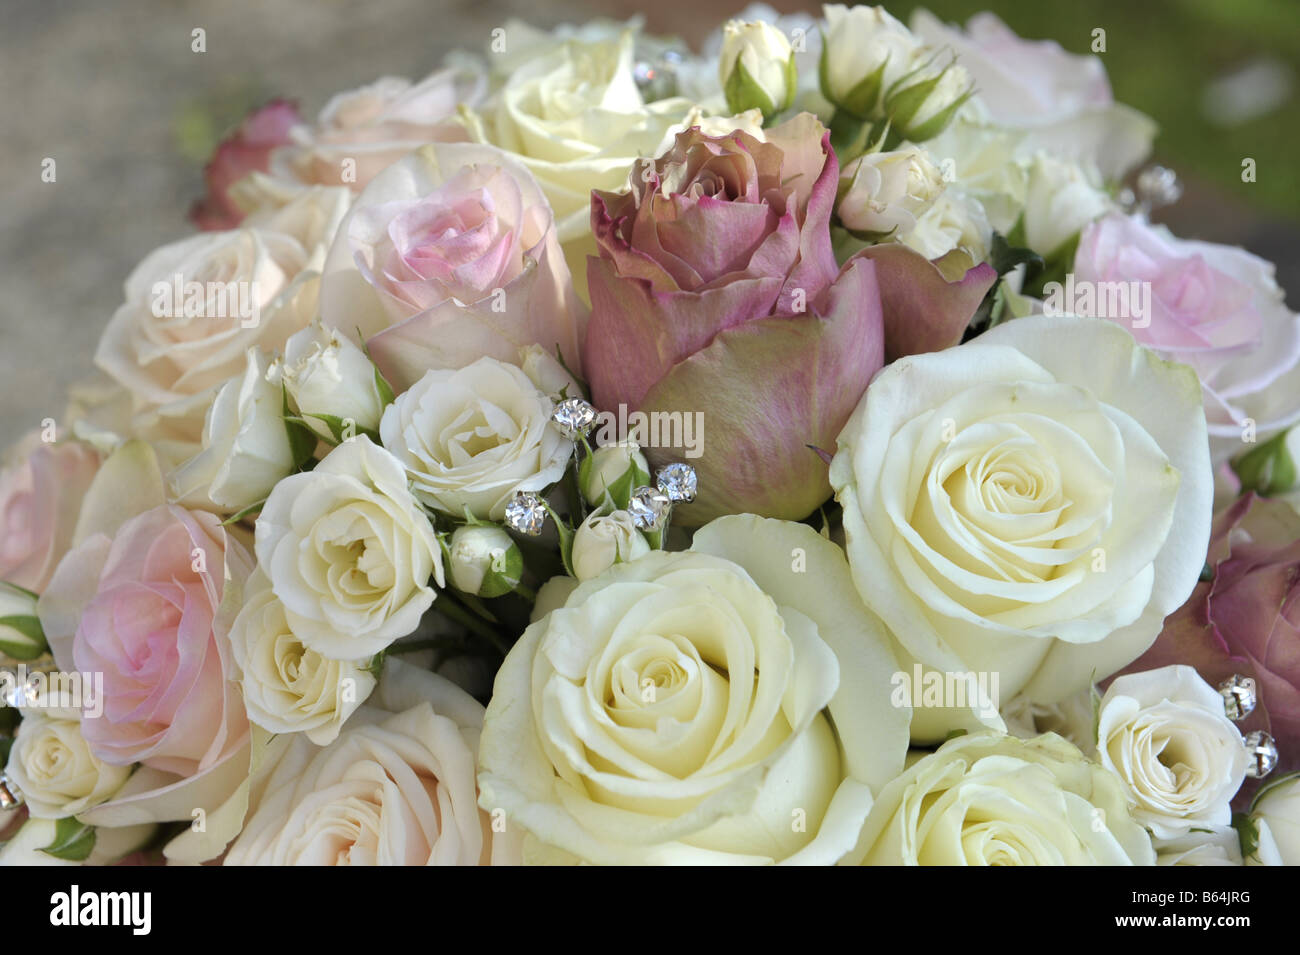 Wedding bouquet corsage of white, cream and pink roses Stock Photo